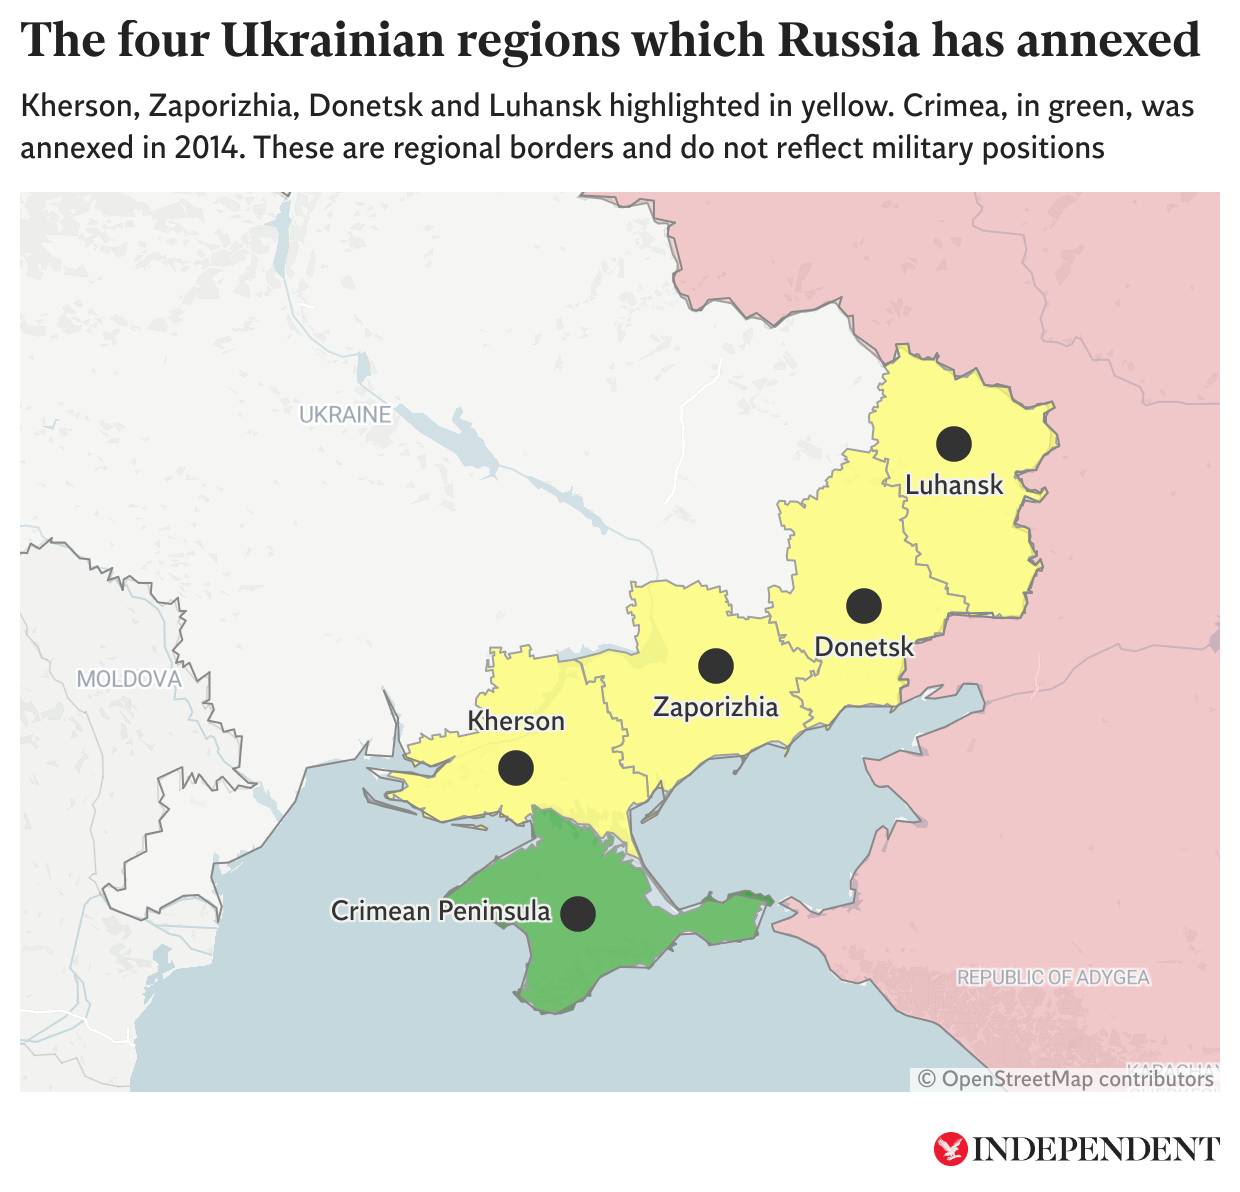 The four Ukrainian regions, in yellow, that Russia annexed in September 2022